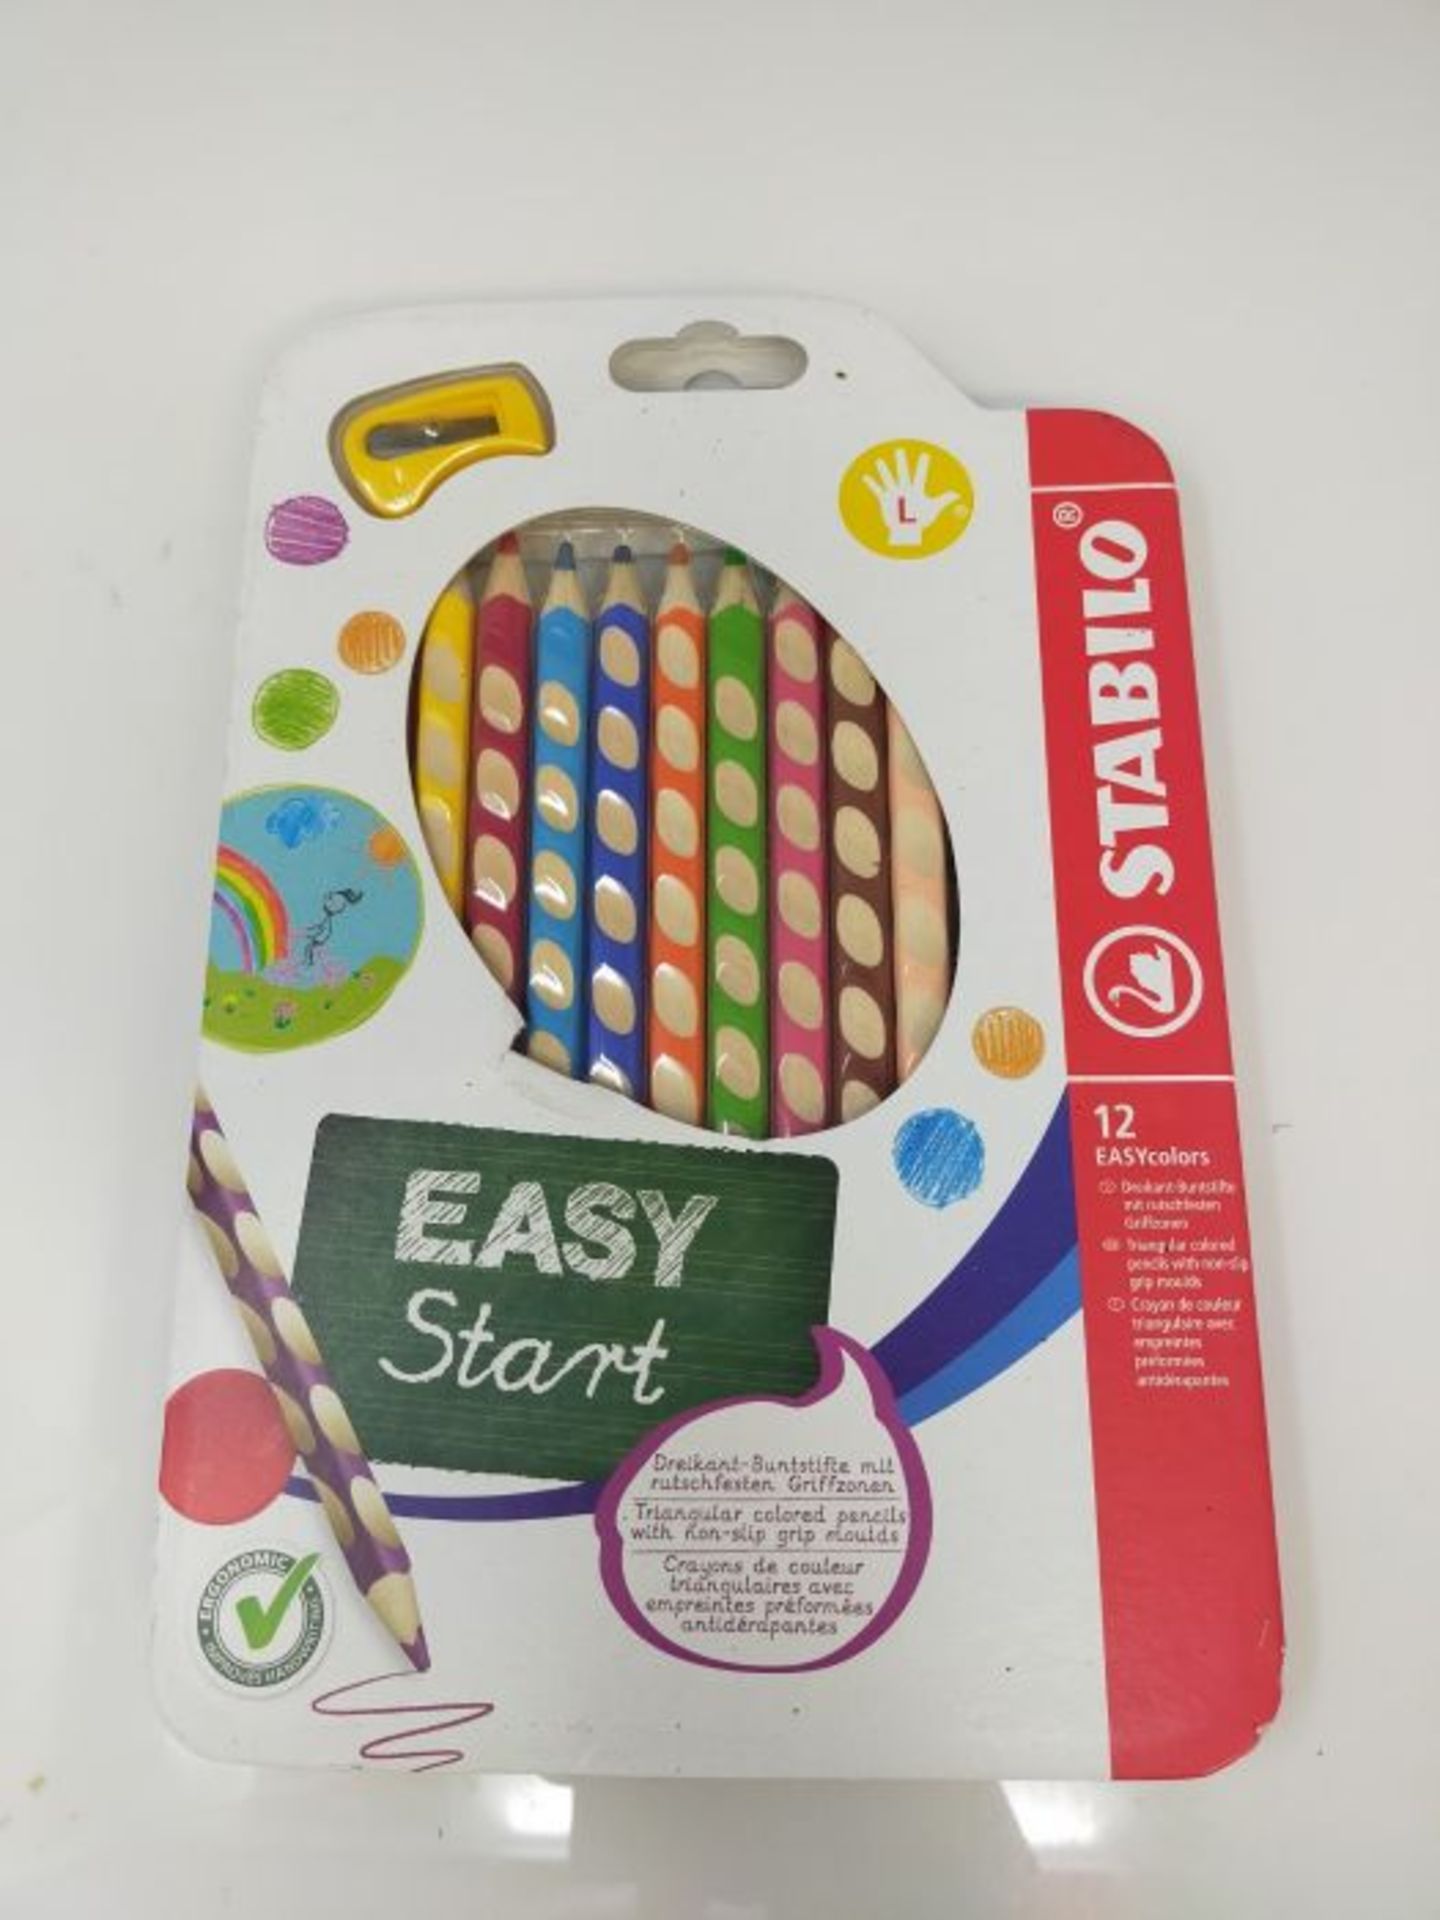 Colouring Pencil - STABILO EASYcolors Left handed Wallet of 12 Assorted Colours + Shar - Image 2 of 2